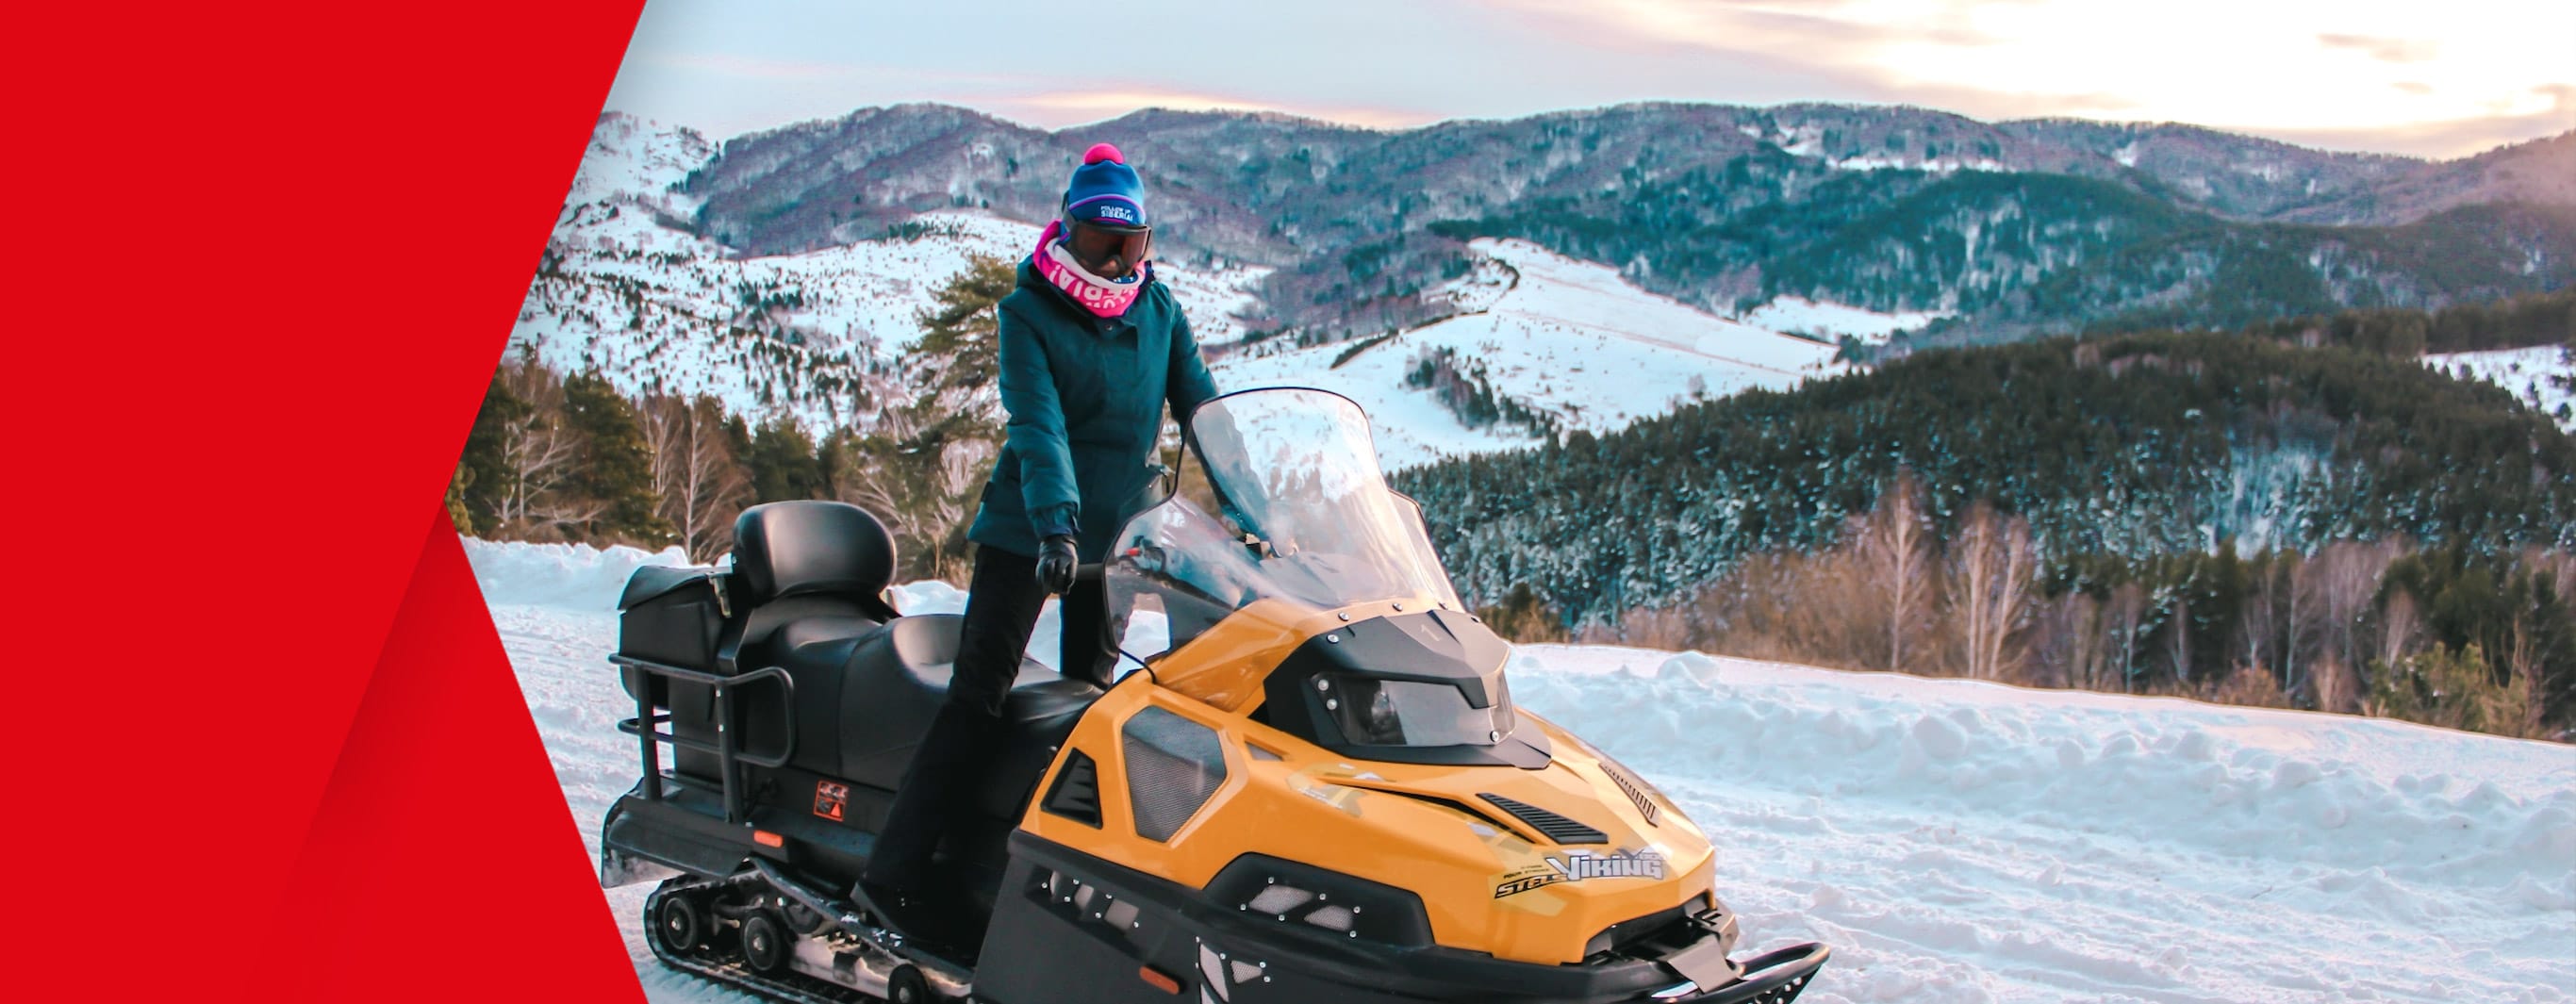 A woman wearing thick skiing clothing and full-face glasses poses upright upon a stationary snowmobile in the midst of the frozen wilderness